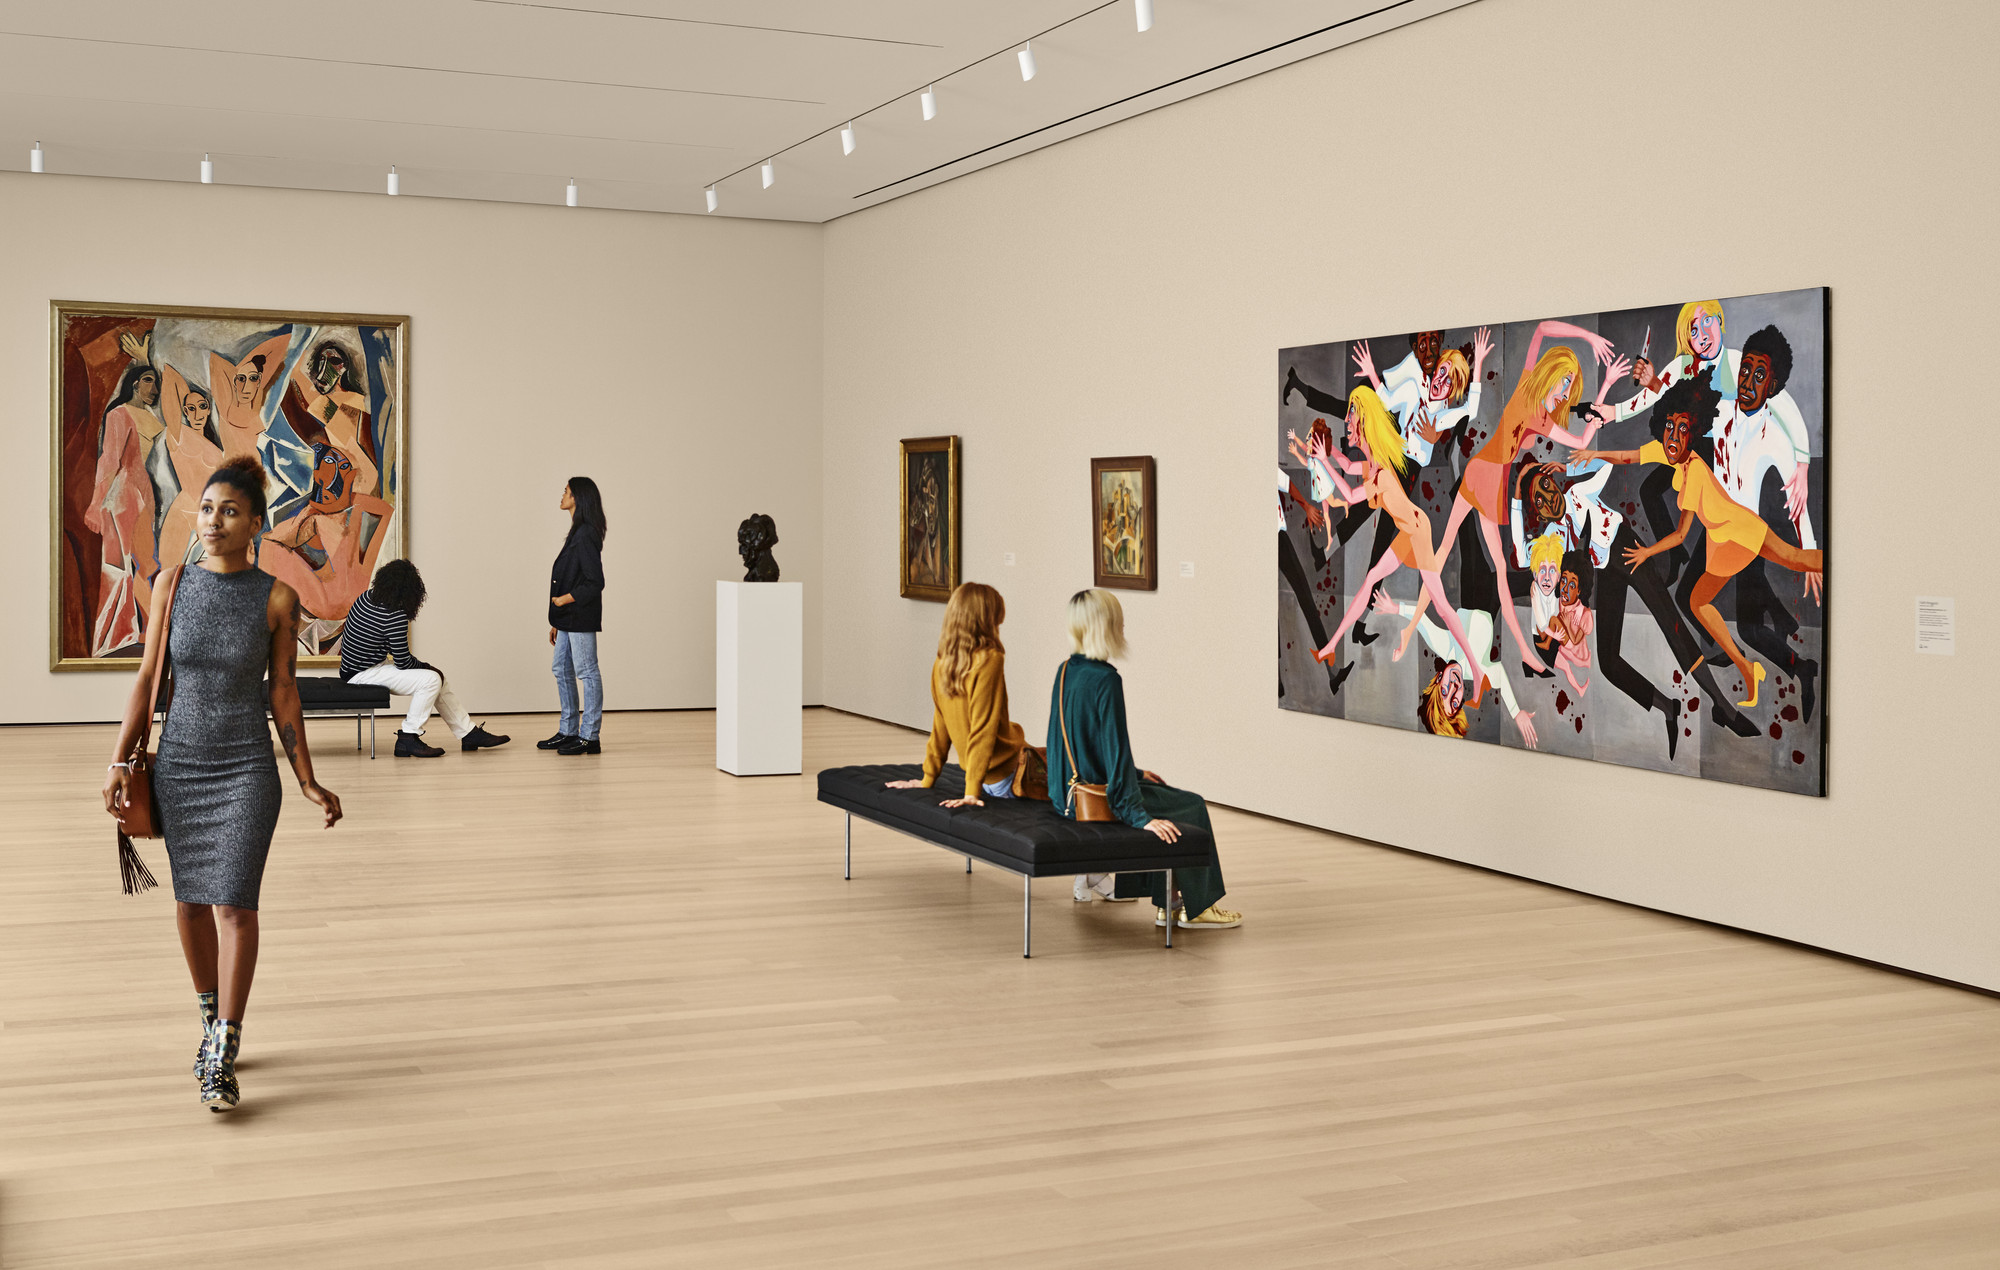 A view of the fifth-floor collection galleries. Shown (from left): Pablo Picasso. Les Demoiselles d’Avignon. 1907. Oil on canvas. Acquired through the Lillie P. Bliss Bequest (by exchange); Pablo Picasso. Woman’s Head (Fernande). 1909. Bronze. Purchase; Pablo Picasso. Woman with Pears. 1909. Oil on canvas. Florene May Schoenborn Bequest; Pablo Picasso. The Reservoir, Horta de Ebro. 1909. Oil on canvas. Gift of Mr. and Mrs. David Rockefeller. All works by Pablo Picasso © 2019 Estate of Pablo Picasso/Artists Rights Society (ARS), New York; Faith Ringgold. American People Series #20: Die. 1967. Oil on canvas, two panels. Acquired through the generosity of The Modern Women’s Fund, Ronnie F. Heyman, Eva and Glenn Dubin, Lonti Ebers, Michael S. Ovitz, Daniel and Brett Sundheim, and Gary and Karen Winnick. Photo: Noah Kalina